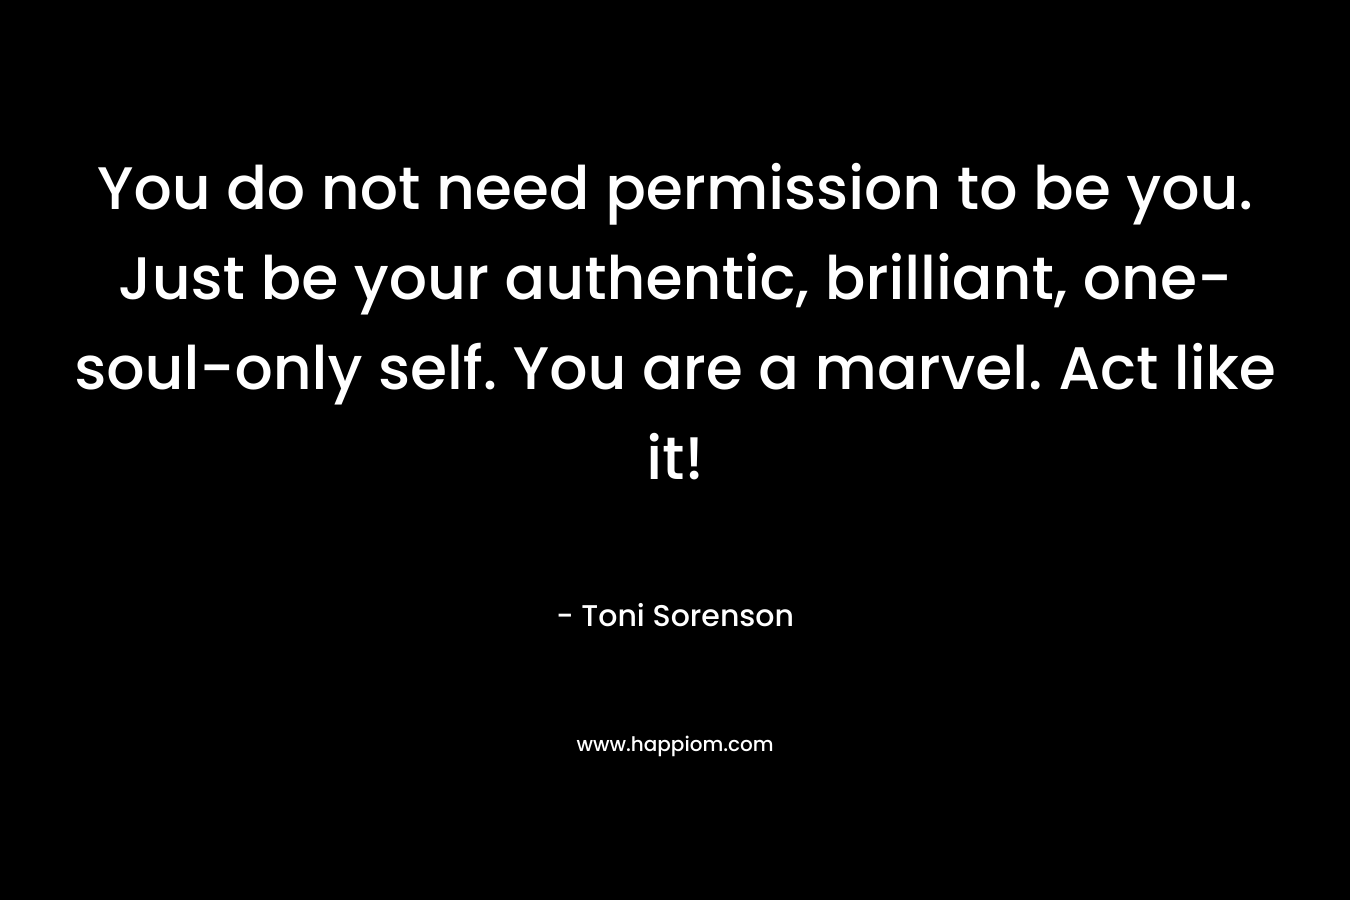 You do not need permission to be you. Just be your authentic, brilliant, one-soul-only self. You are a marvel. Act like it!